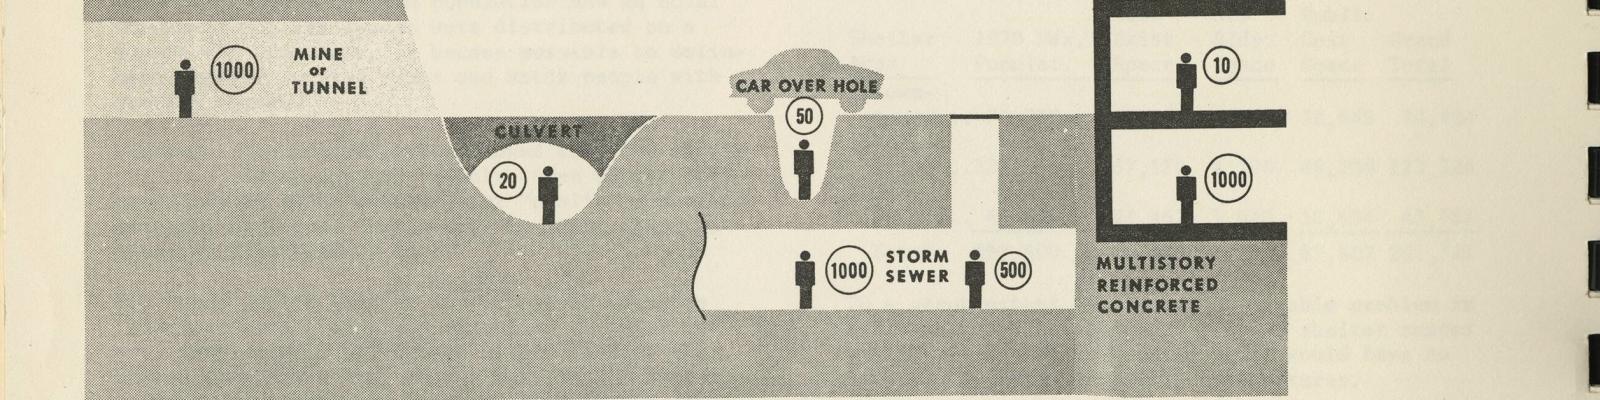 illustration from Lexington's Fallout Shelter Guide